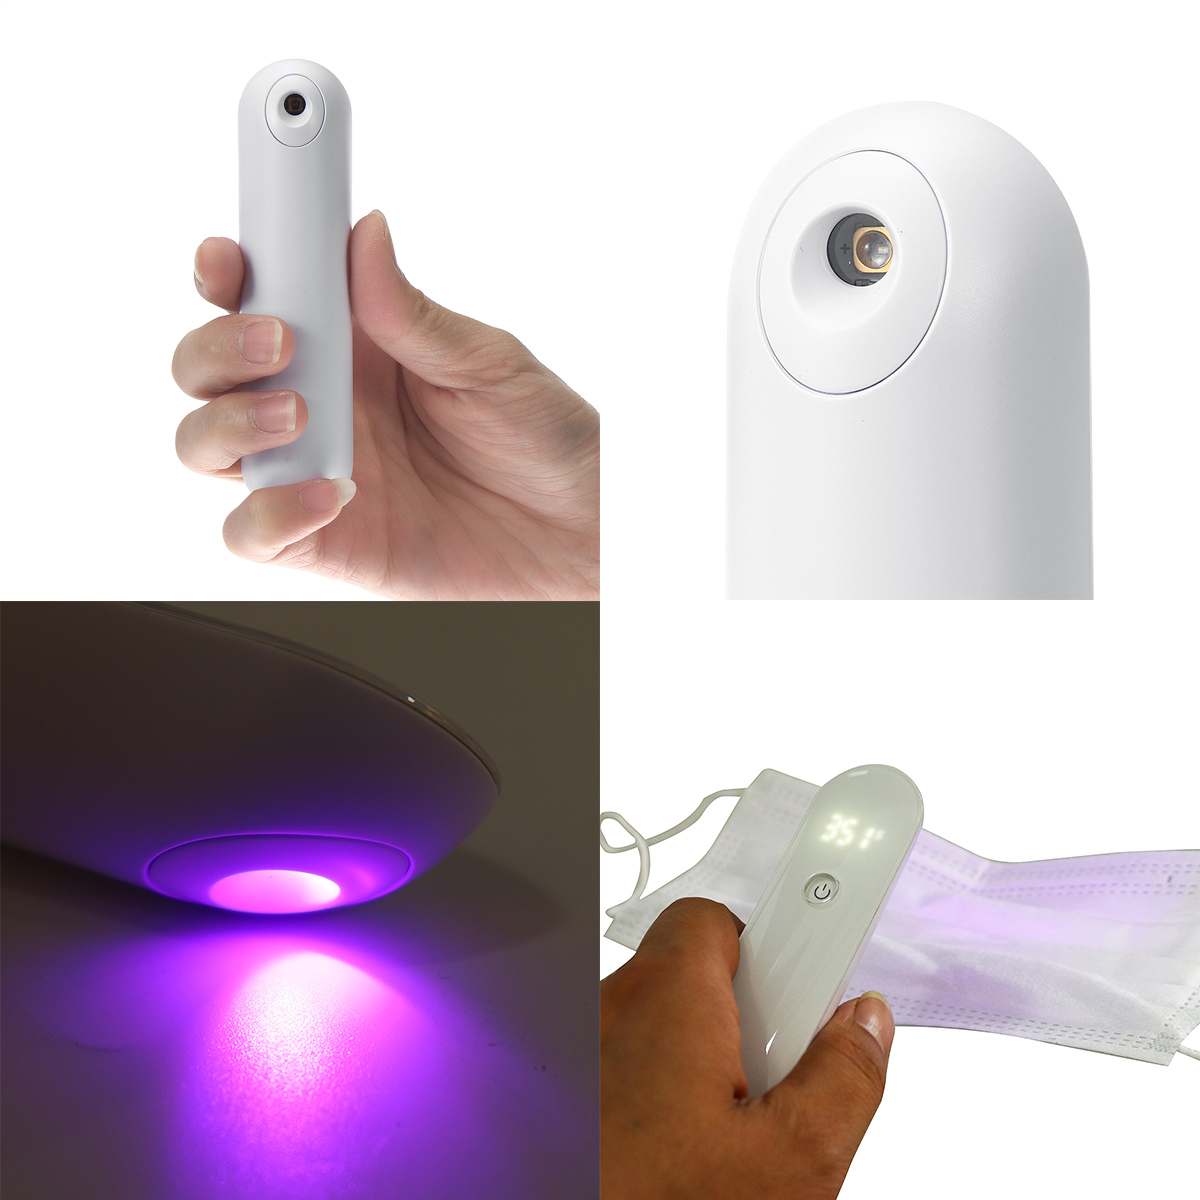 Portable-LED-UV-Sterilizer-Lamp-Disinfection-Handheld-For-Phones-Clothes-Bedding-1670454-4